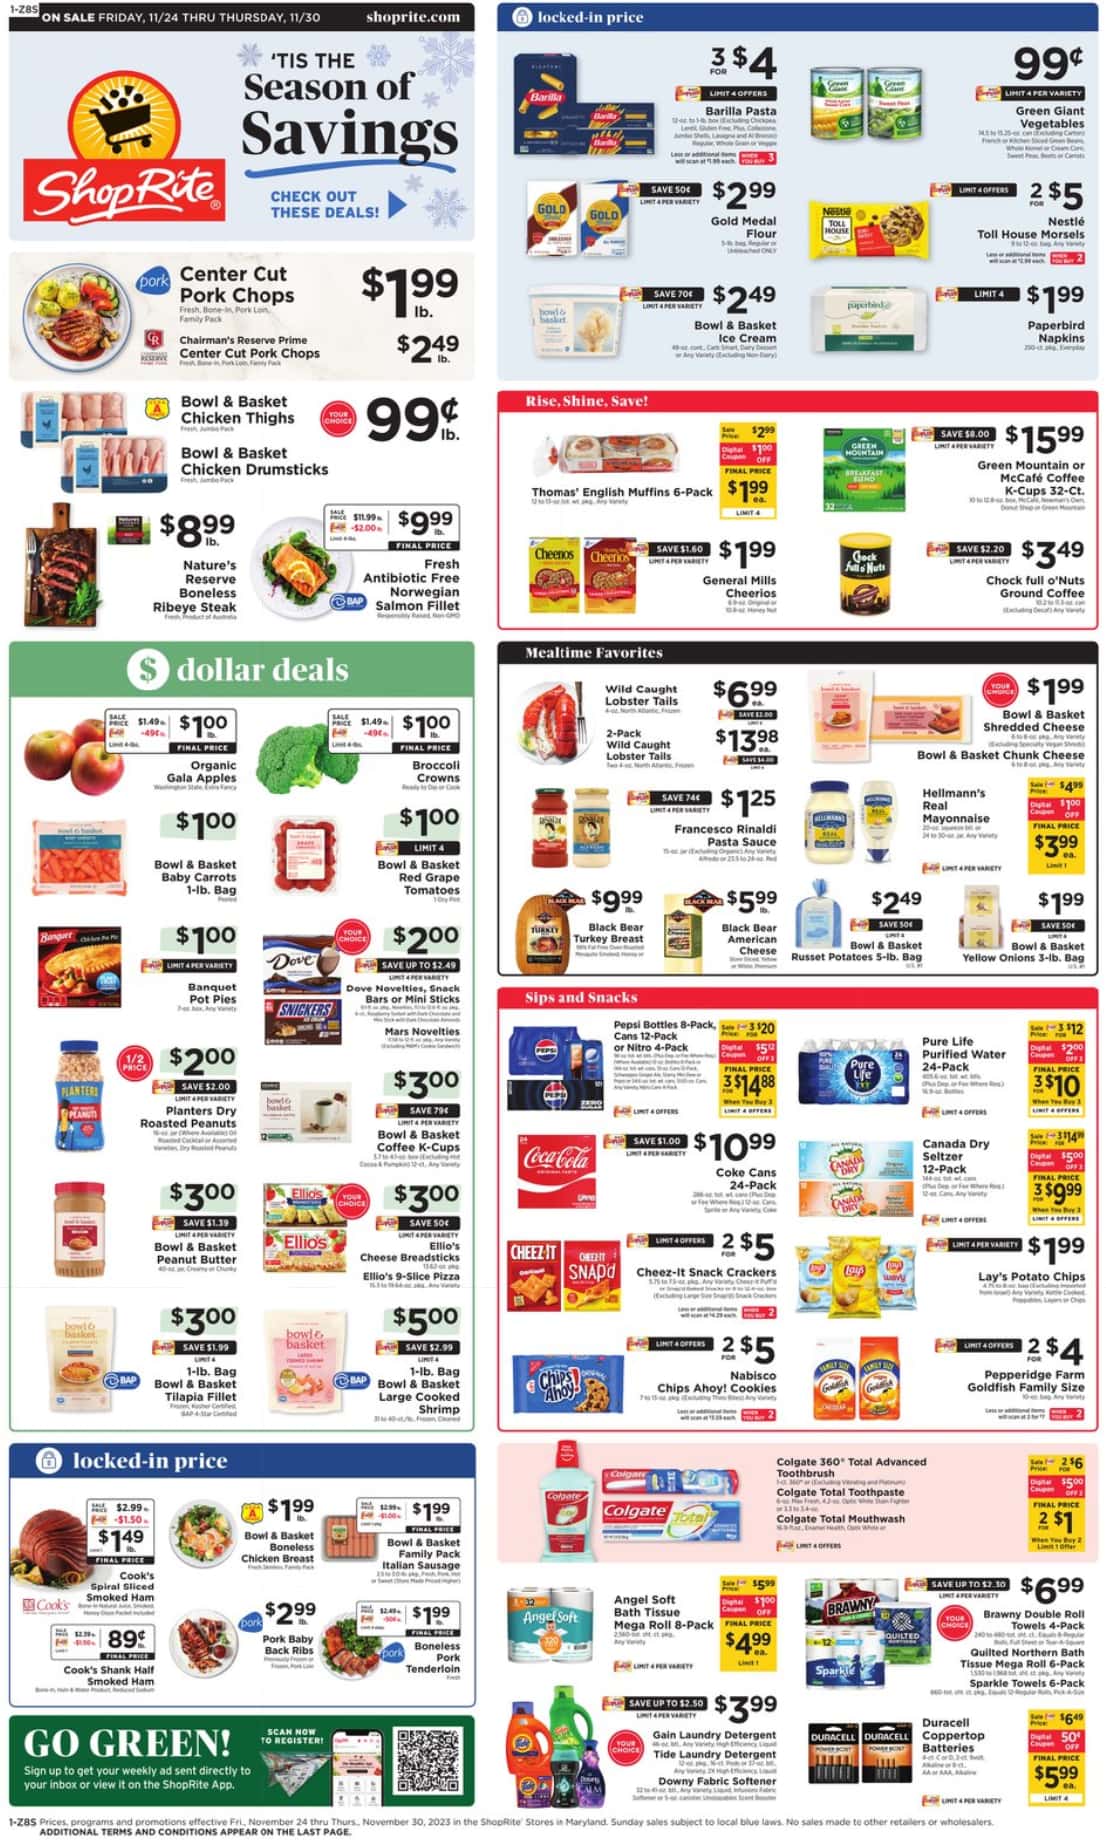 Shoprite Black Friday Sale and Discounts